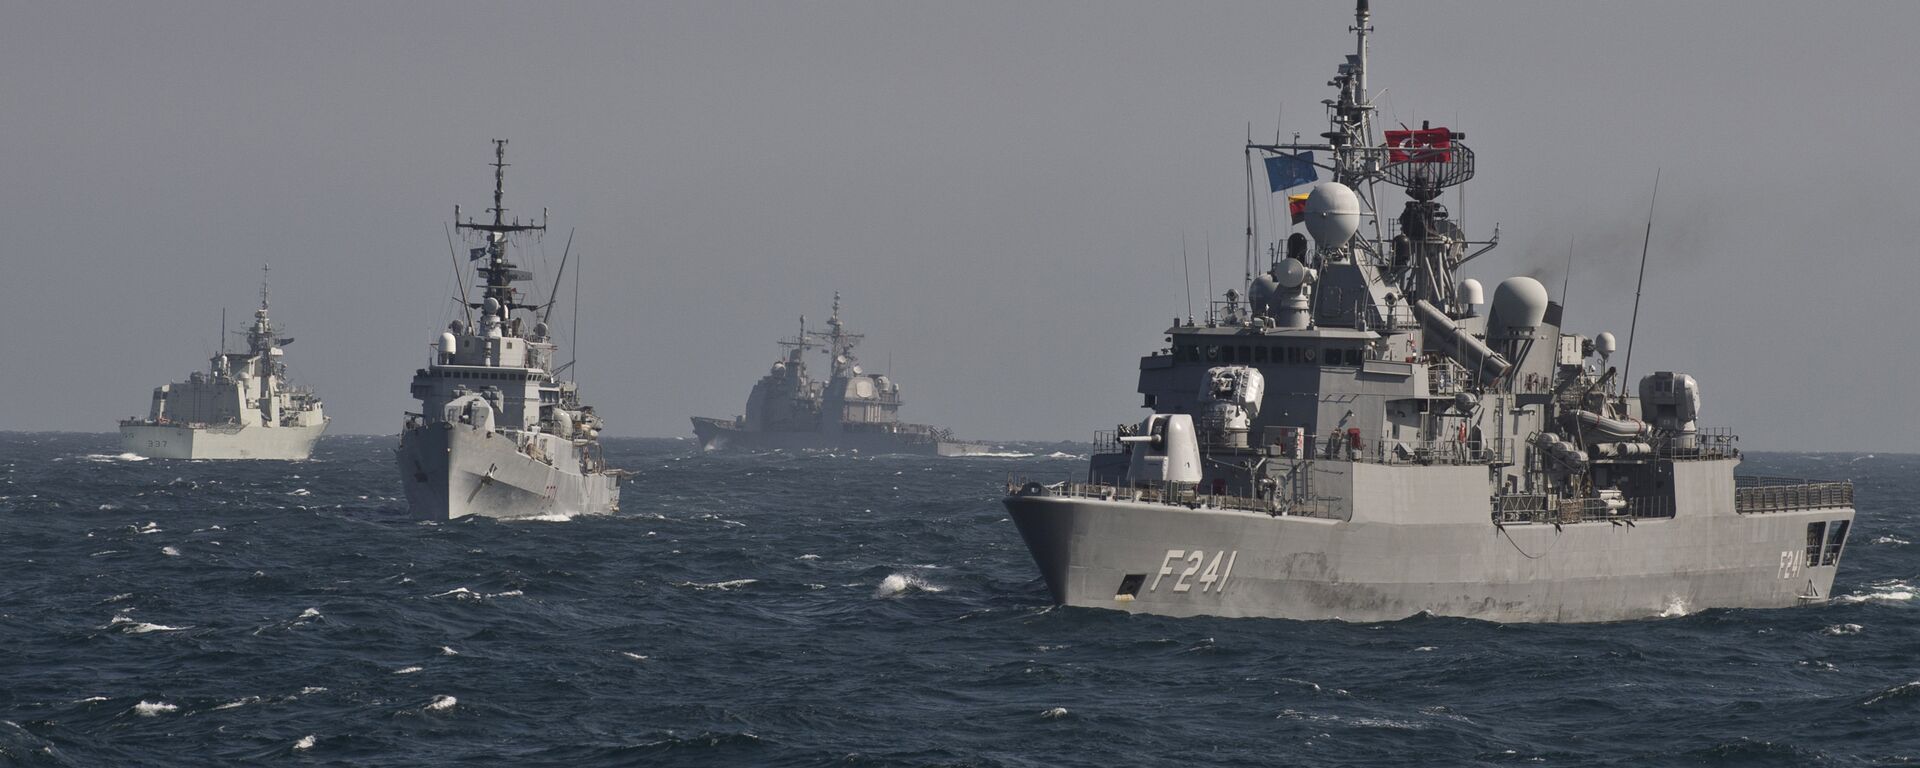 War ships of the NATO Standing Maritime Group-2 take part in a military drill on the Black Sea, 60km from Constanta city March 16, 2015 - Sputnik International, 1920, 11.11.2021